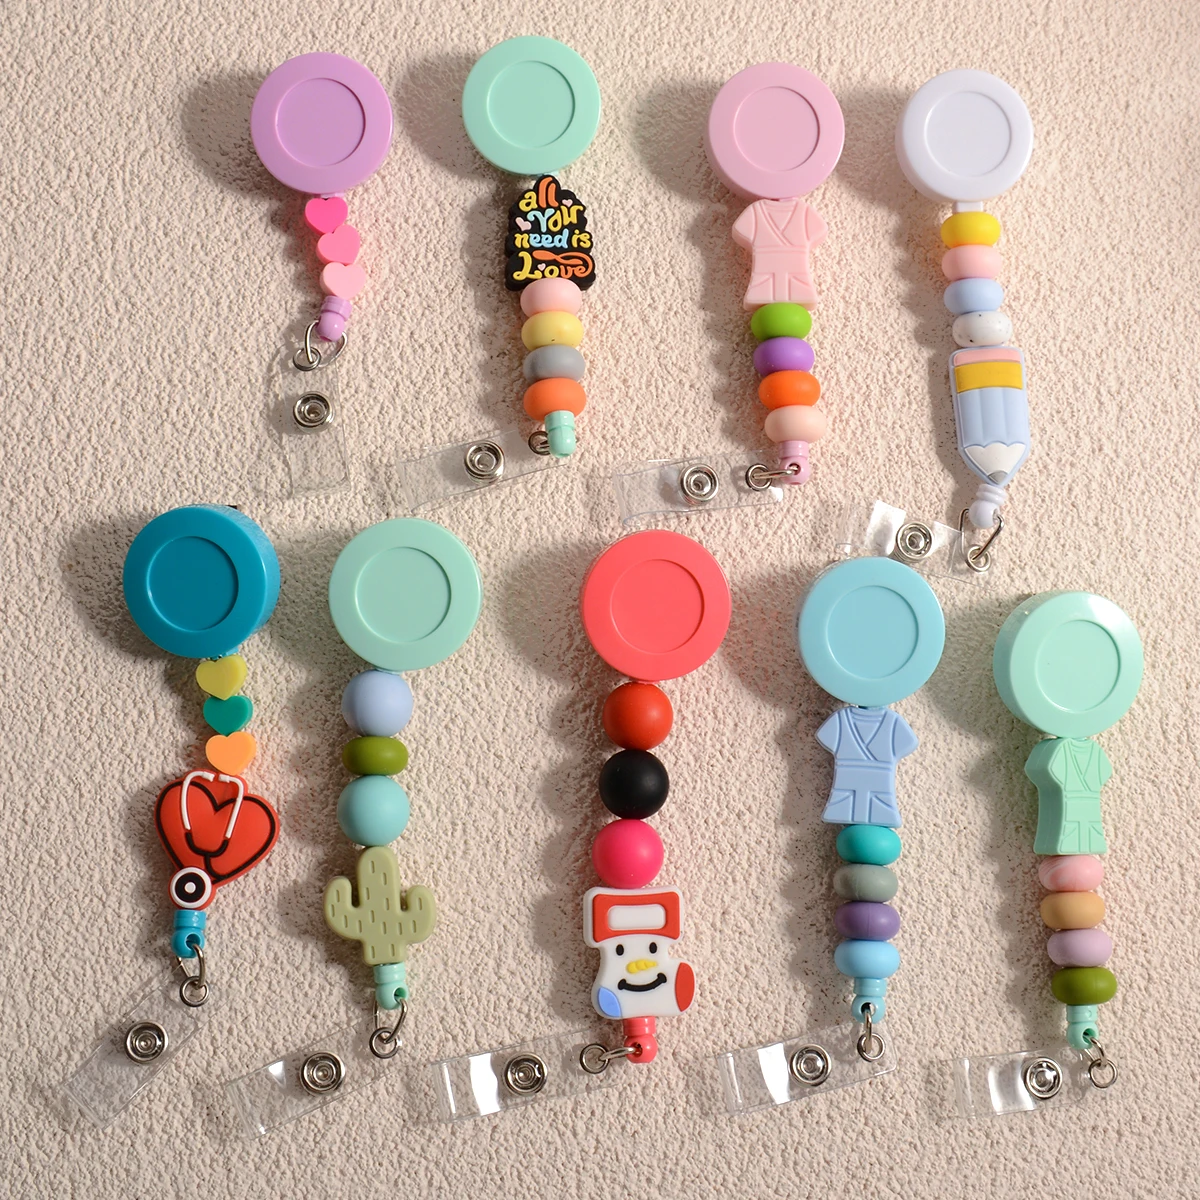 Retractable Silicone Beads Badge Reels BBS Cute Heart Nurse Id Badge Holders with Alligator CliP for Nursing Teachers Office kawaii strawberry bear badge holder nurse accessories girls stuednts cute pink tonal cartoon pass id card holder with lanyard